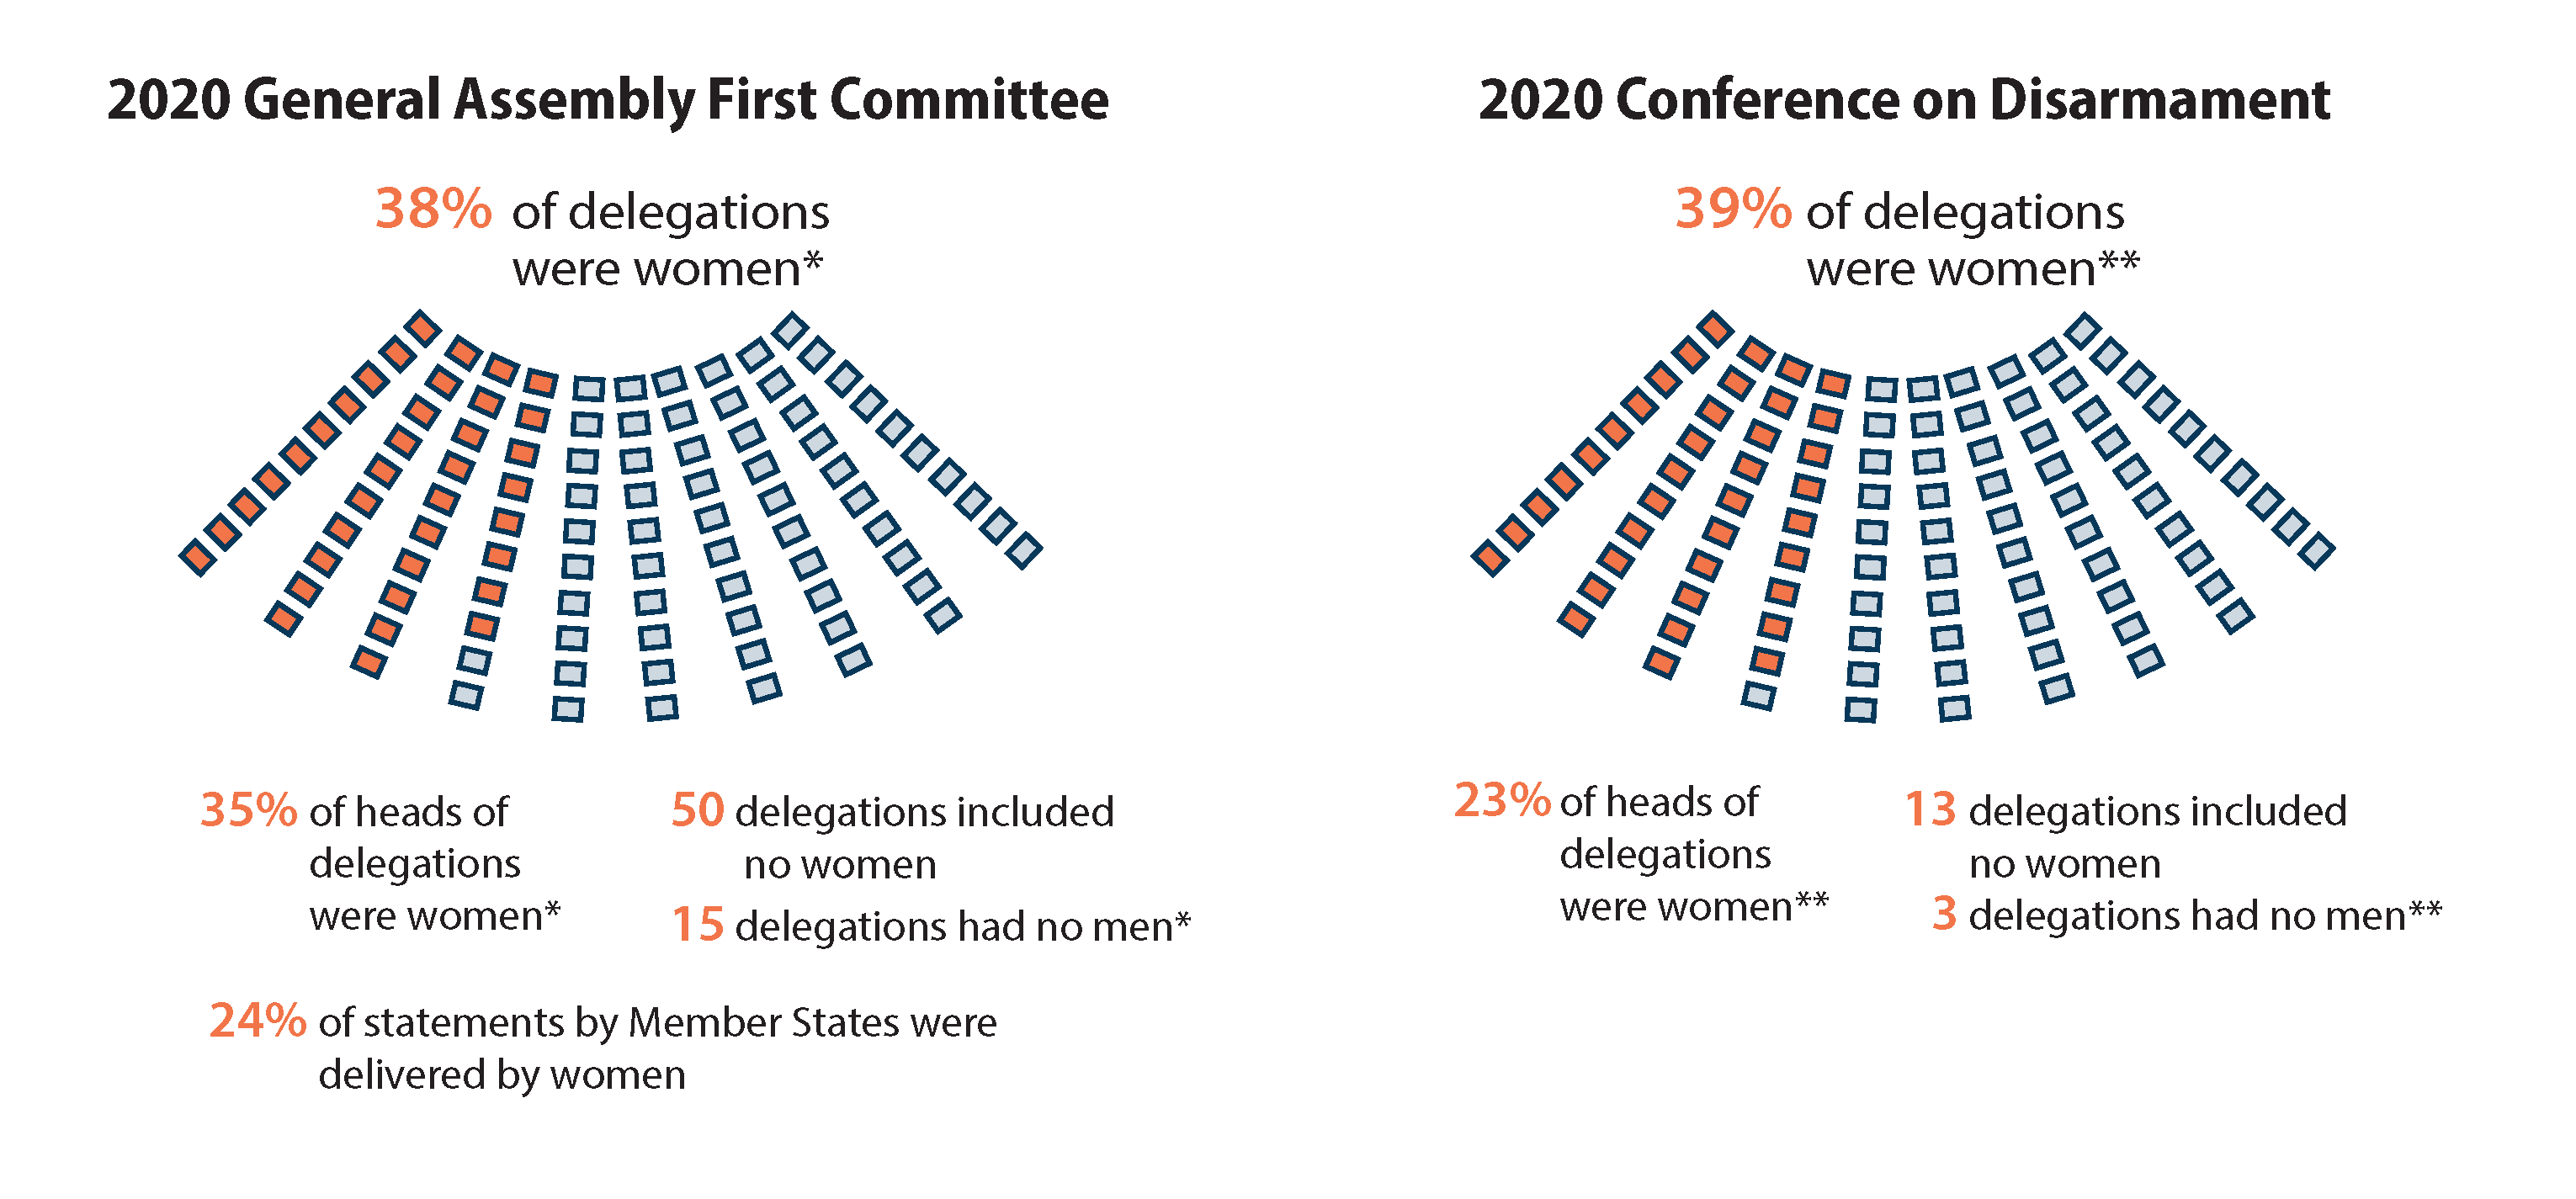 Pictograms showing gender distribution at the sessions of the 2020 General Assembly First Committee and the 2020 Conference on Disarmament